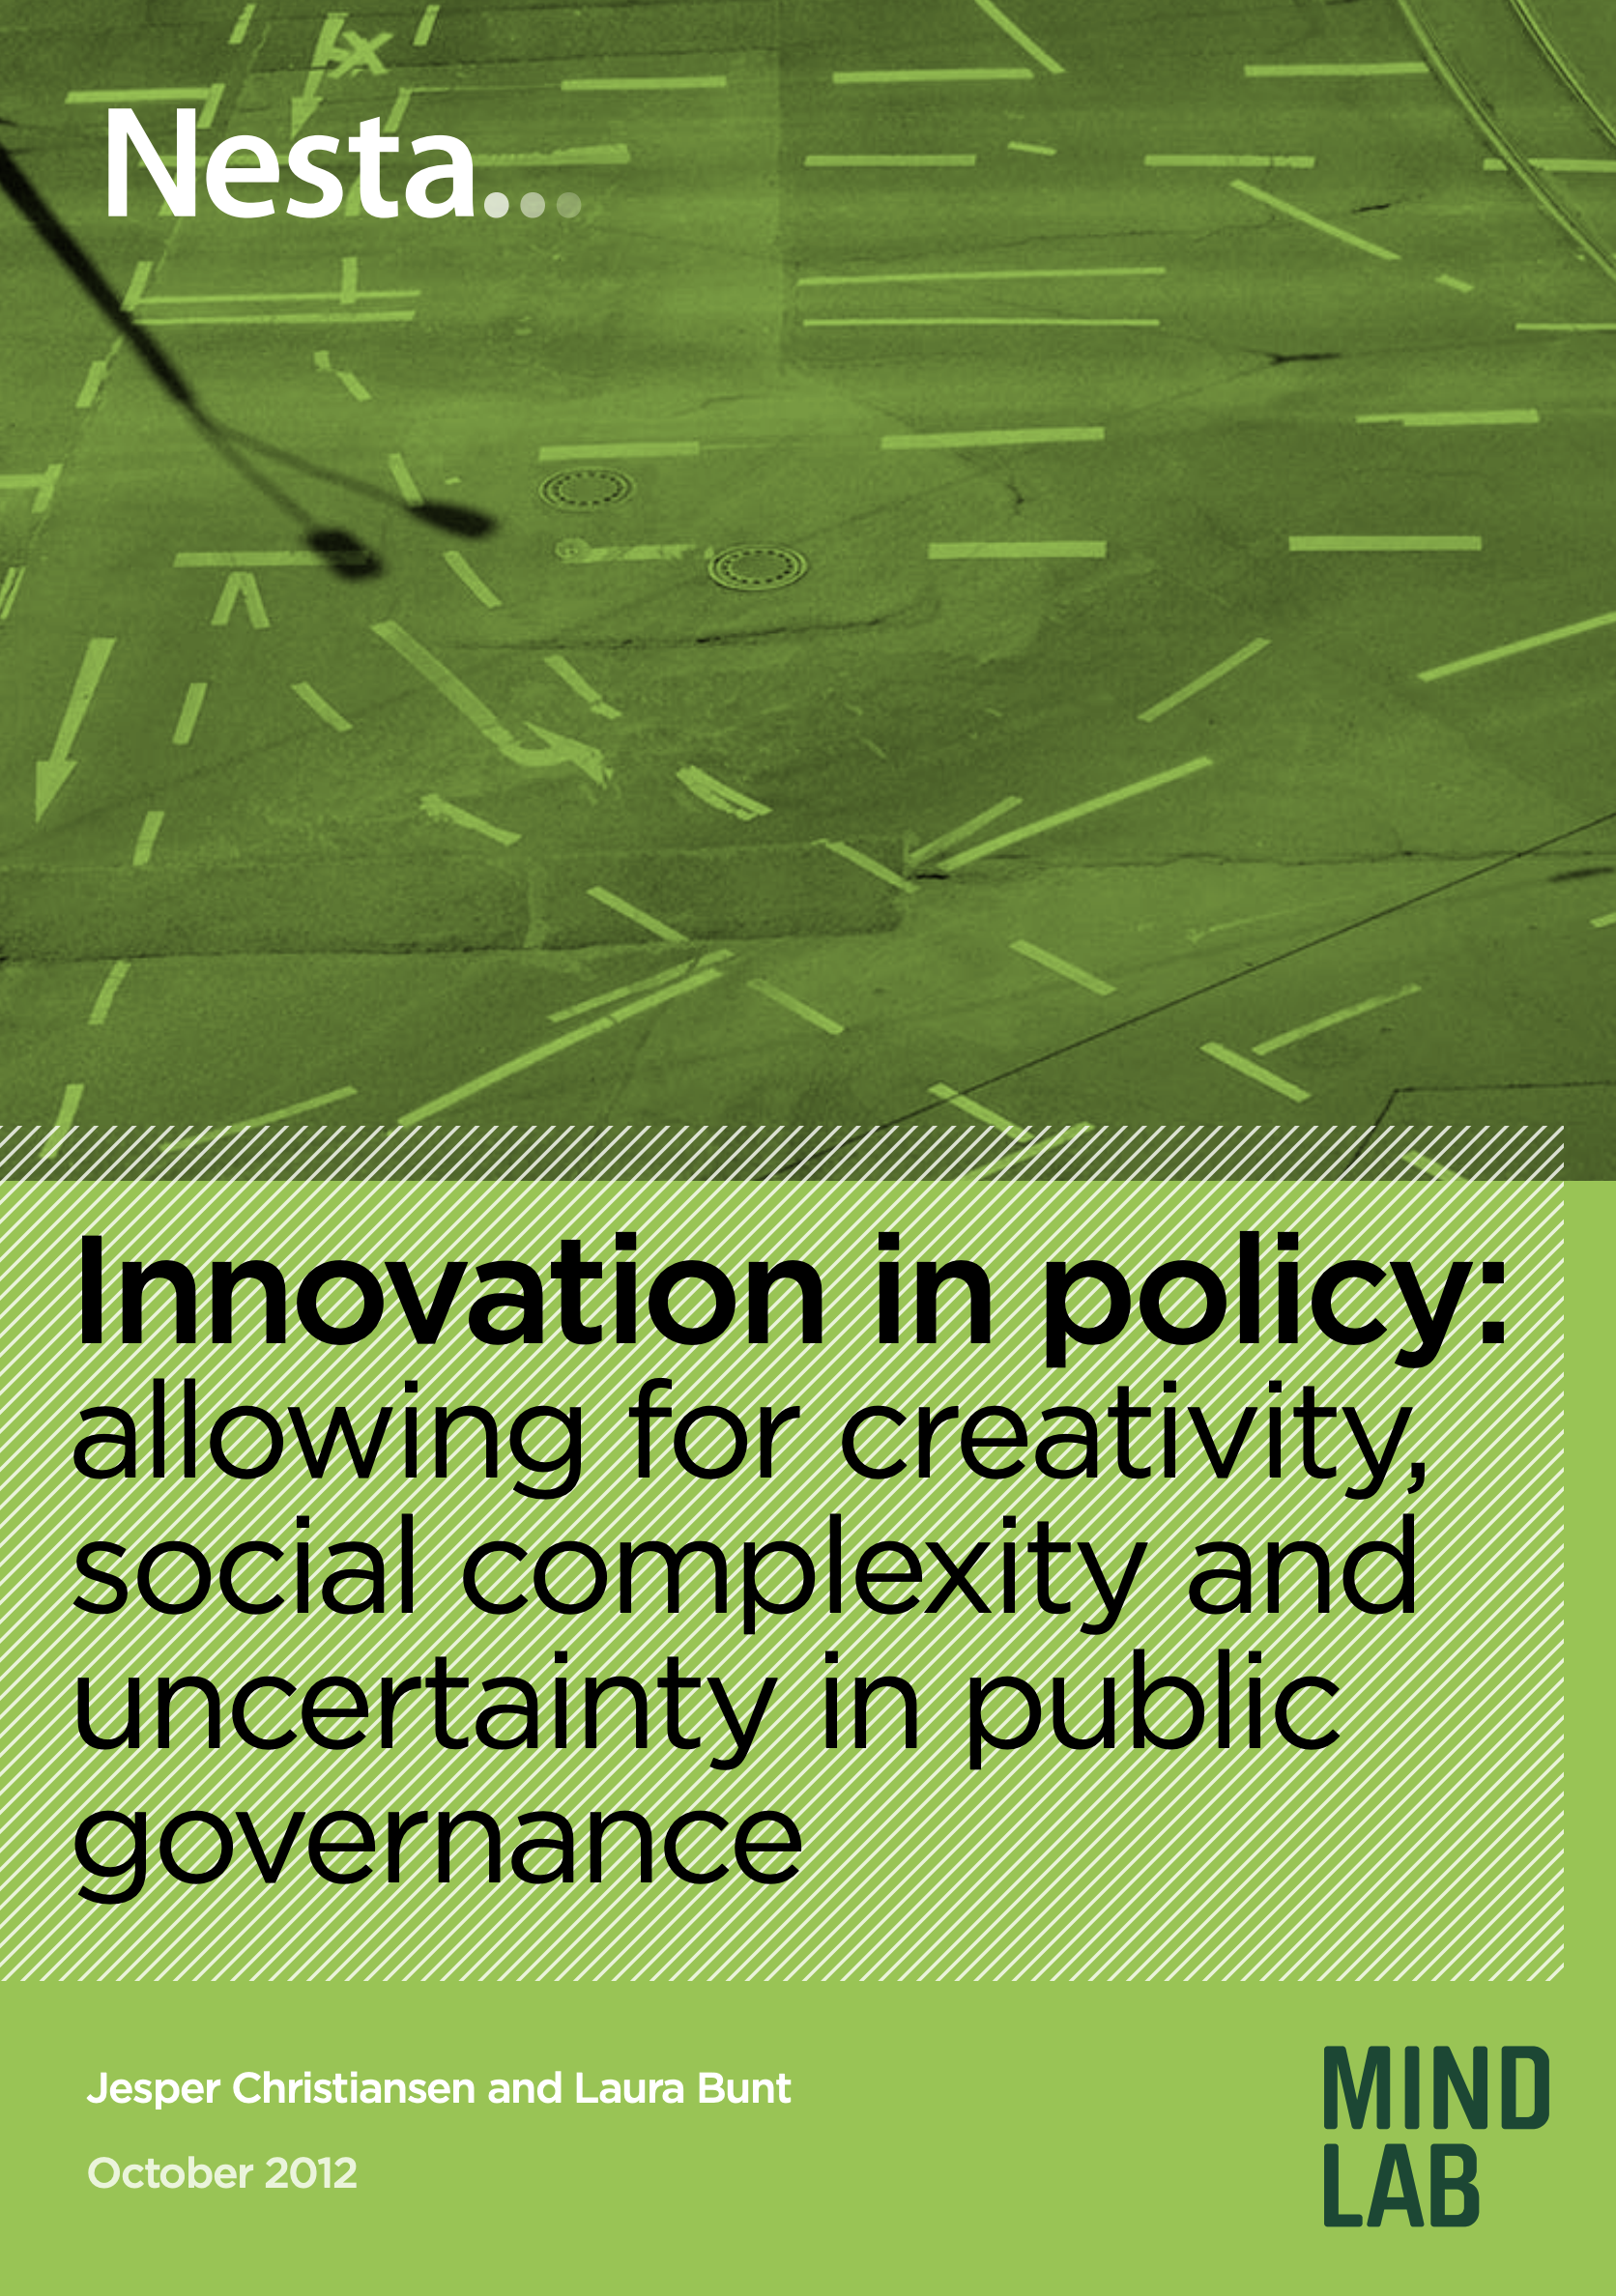 「Innovation in policy: allowing for creativity, social complexity and uncertainty in public governance, Nesta」